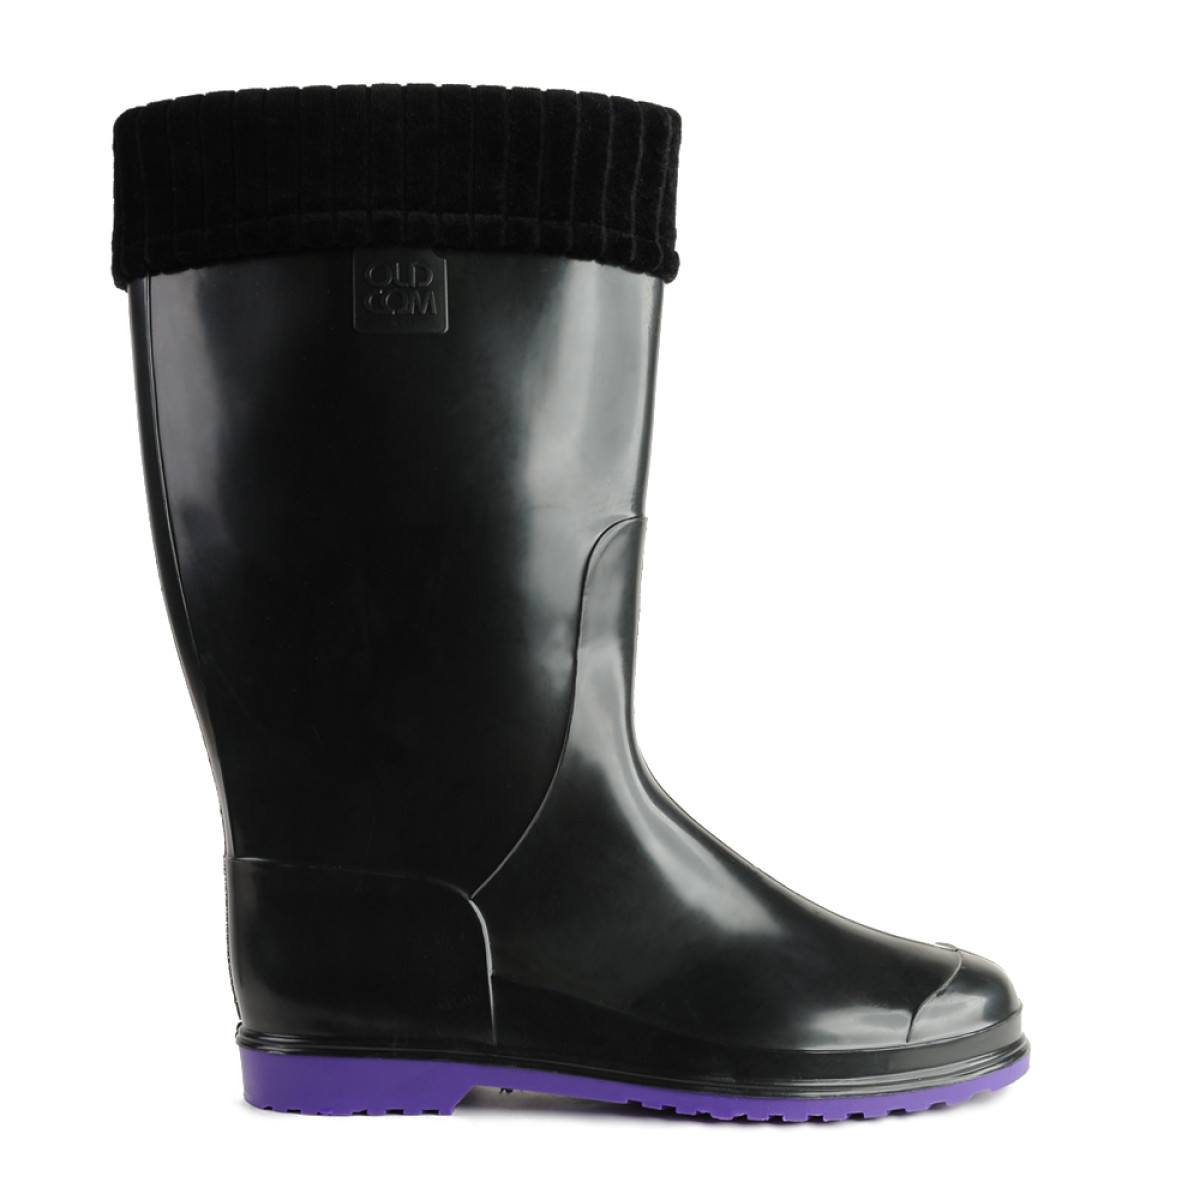 Women's Lining CLASSIC  for high wellies, Black